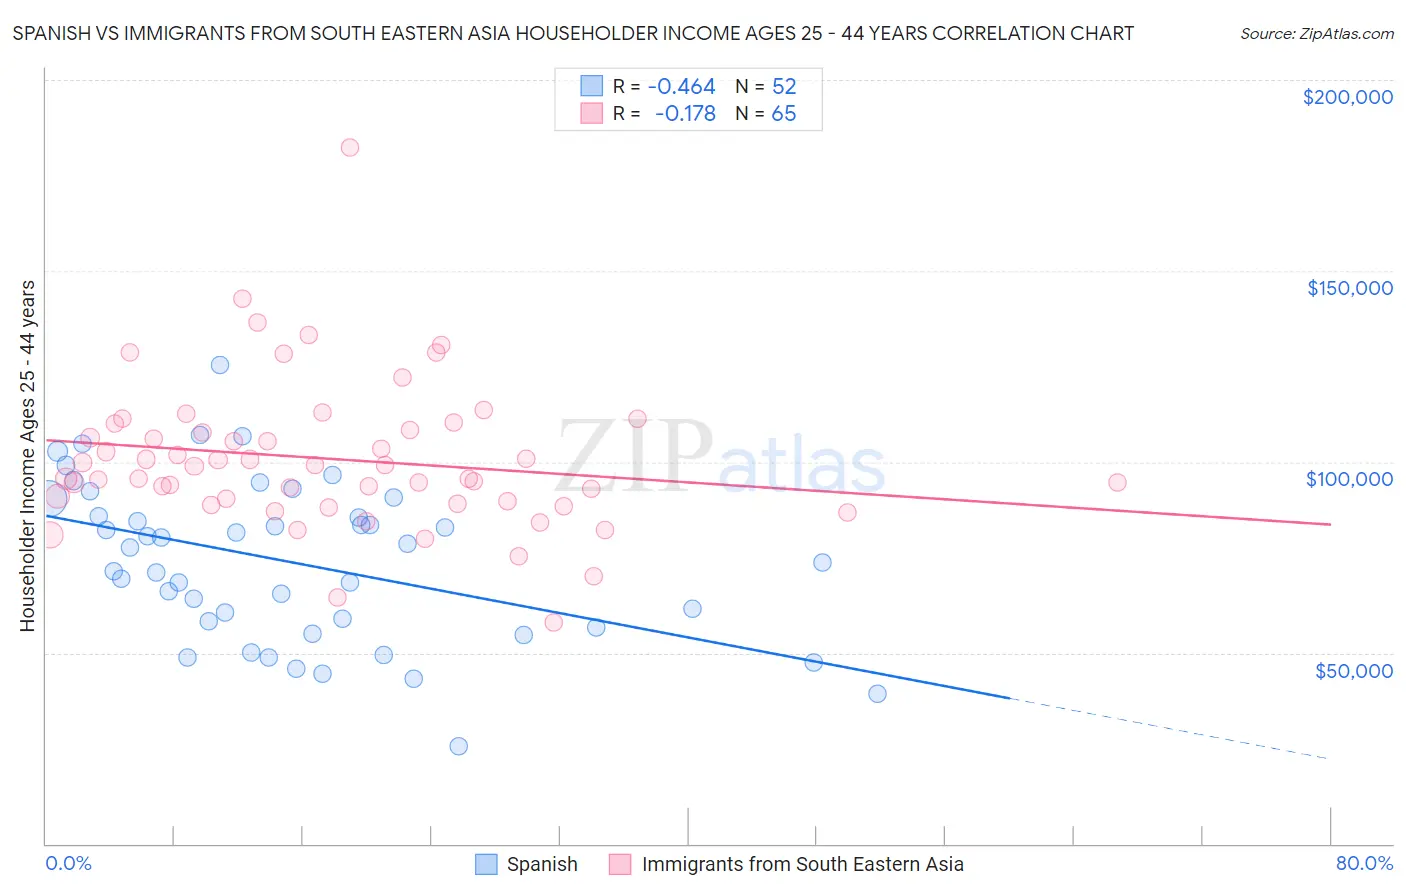 Spanish vs Immigrants from South Eastern Asia Householder Income Ages 25 - 44 years